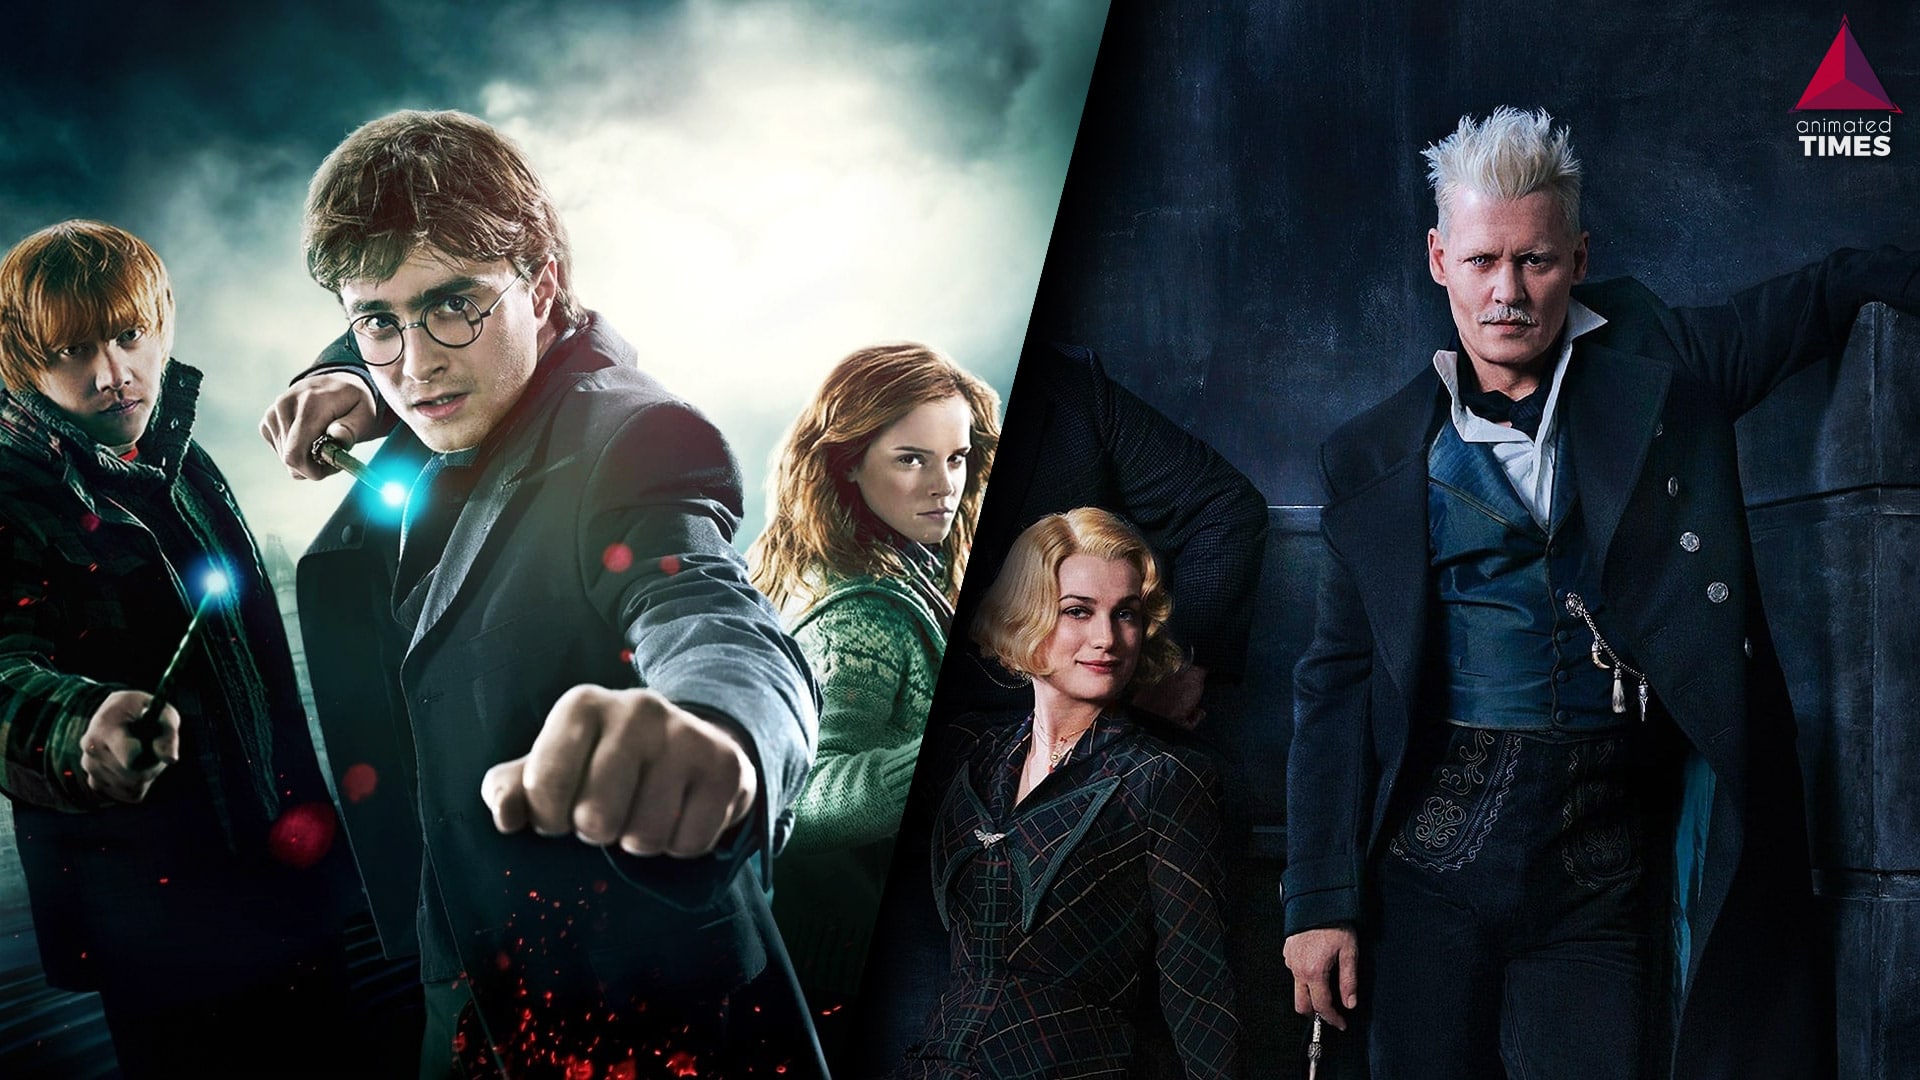 The Future of The Harry Potter Franchise Need a New Angle